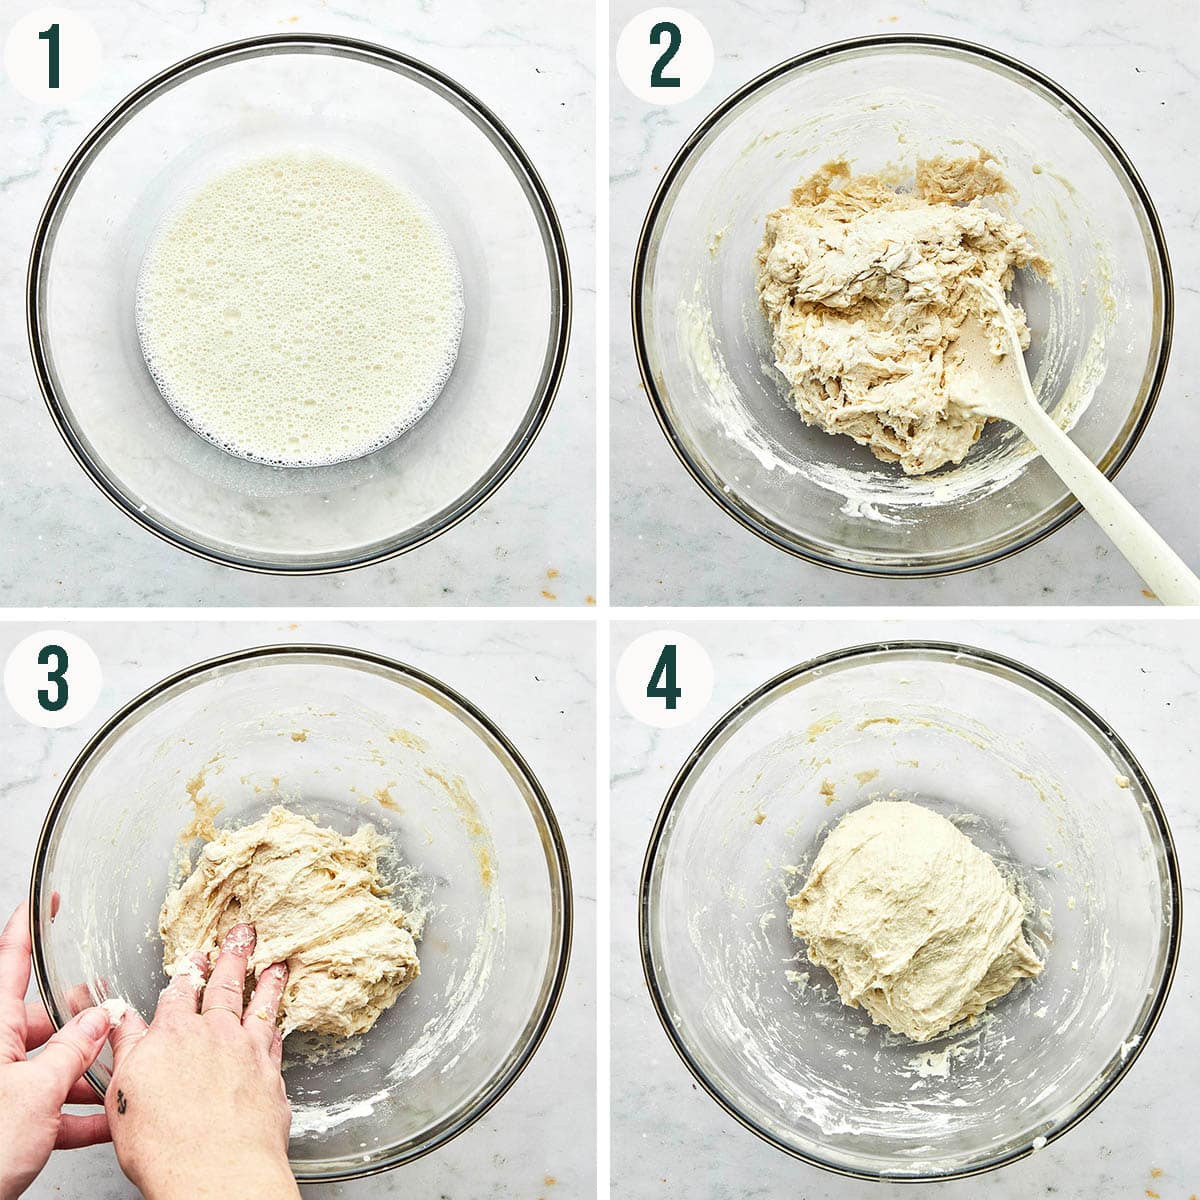 Naan dough steps 1 to 2, mixing the dough and doing stretches and folds.